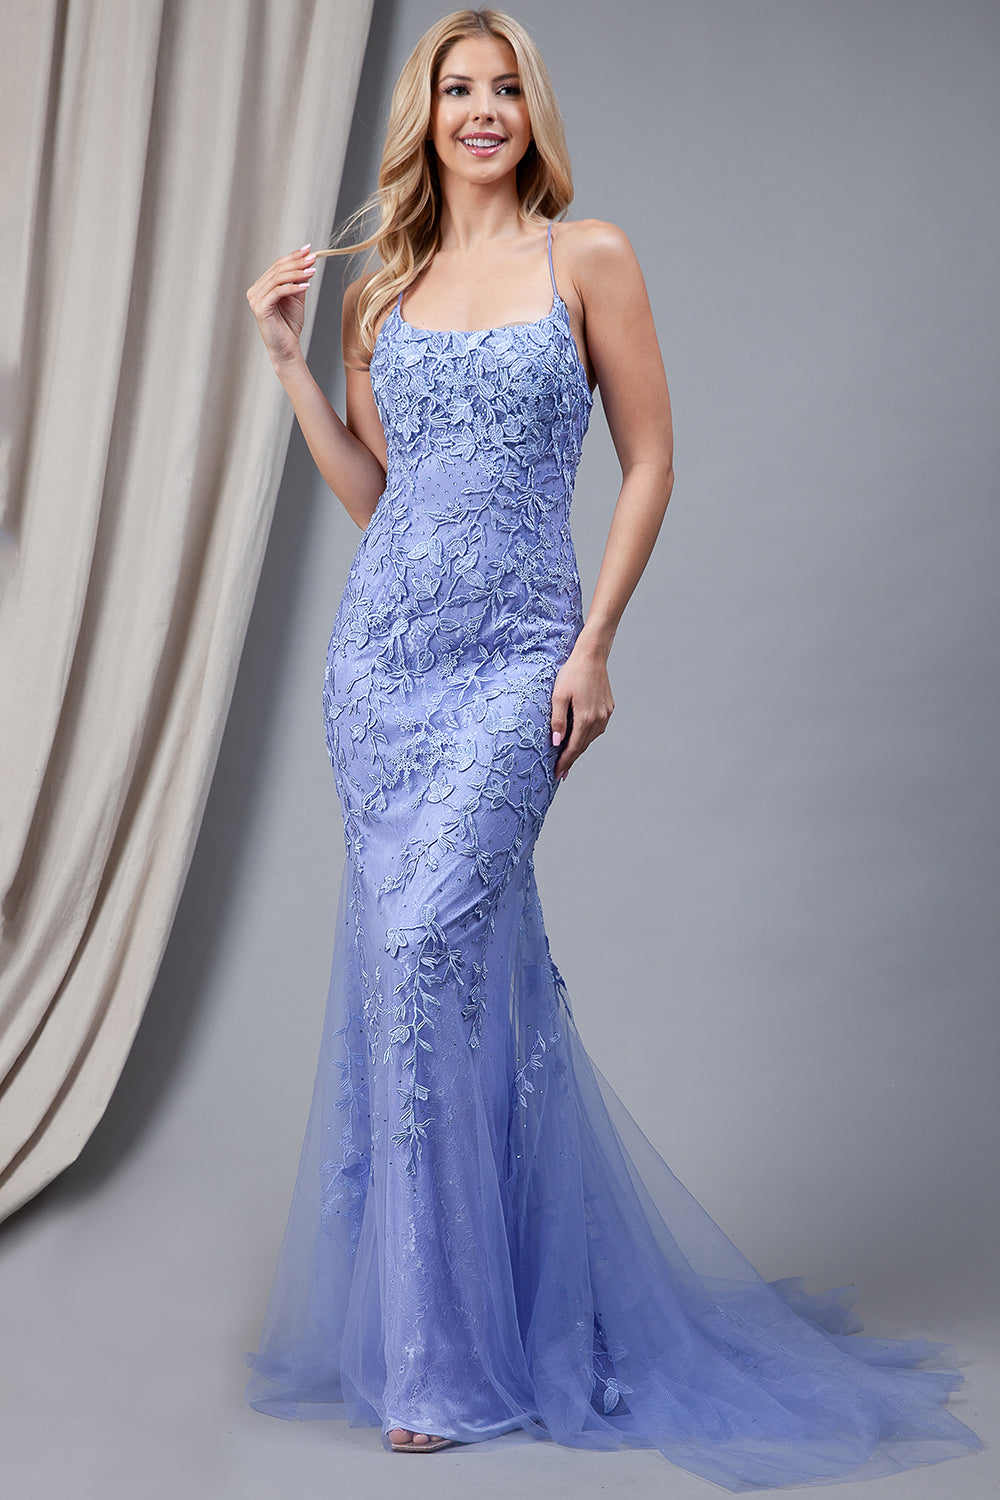 Embroidered Lace Straight Across Mermaid Tail Long Prom Dress AC799 Elsy Style Prom Dress